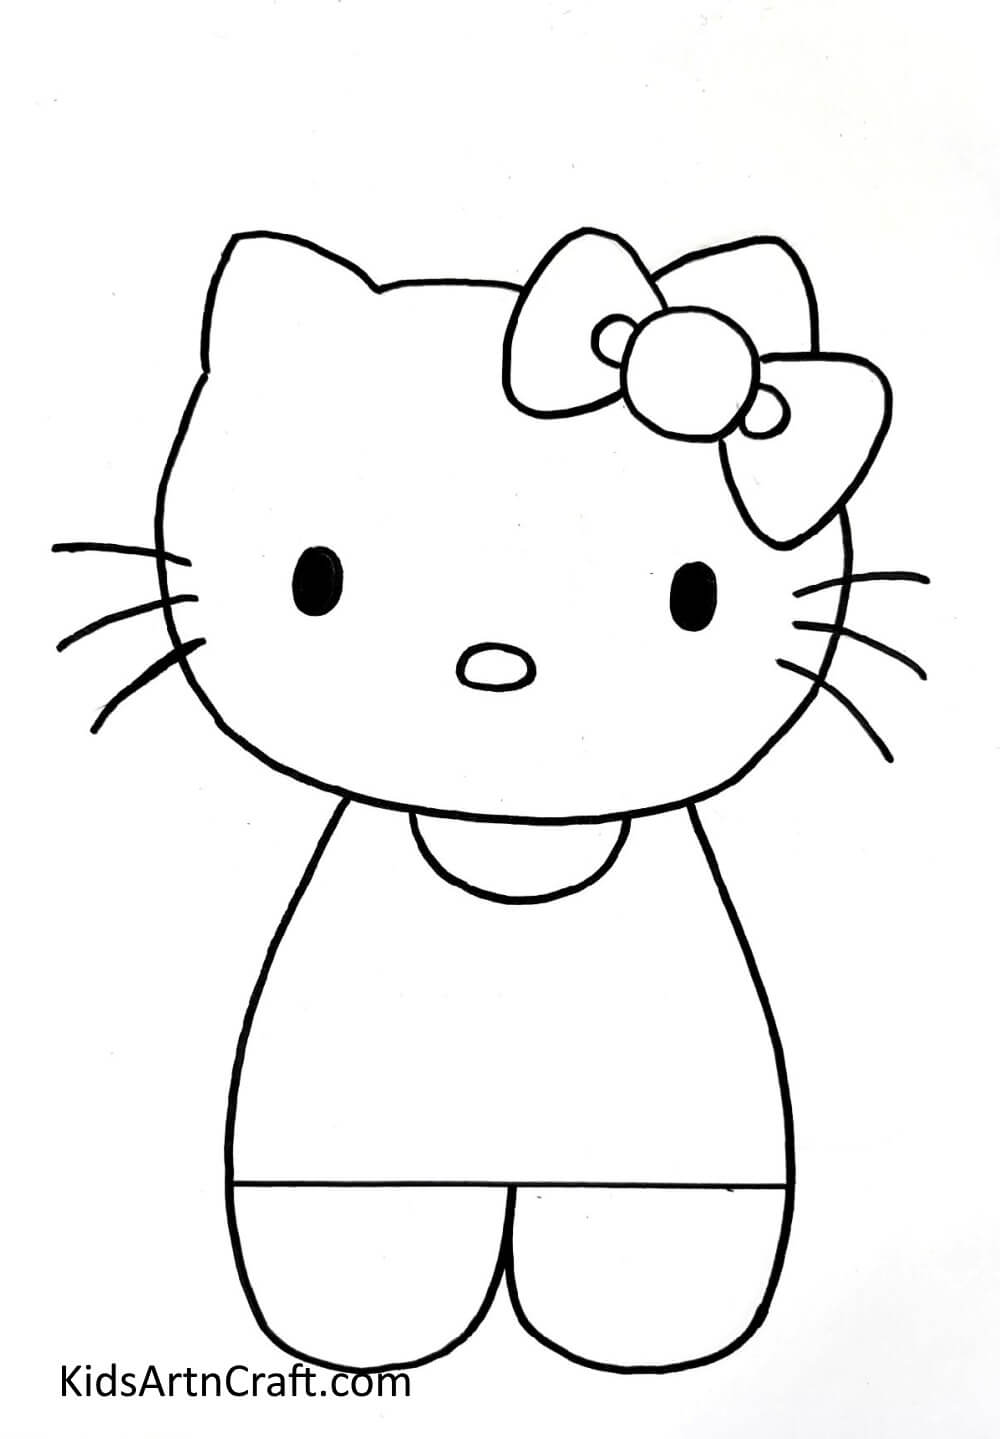 Drawing Kitten's Body - A fun activity for kids to draw a cute kitty at home.